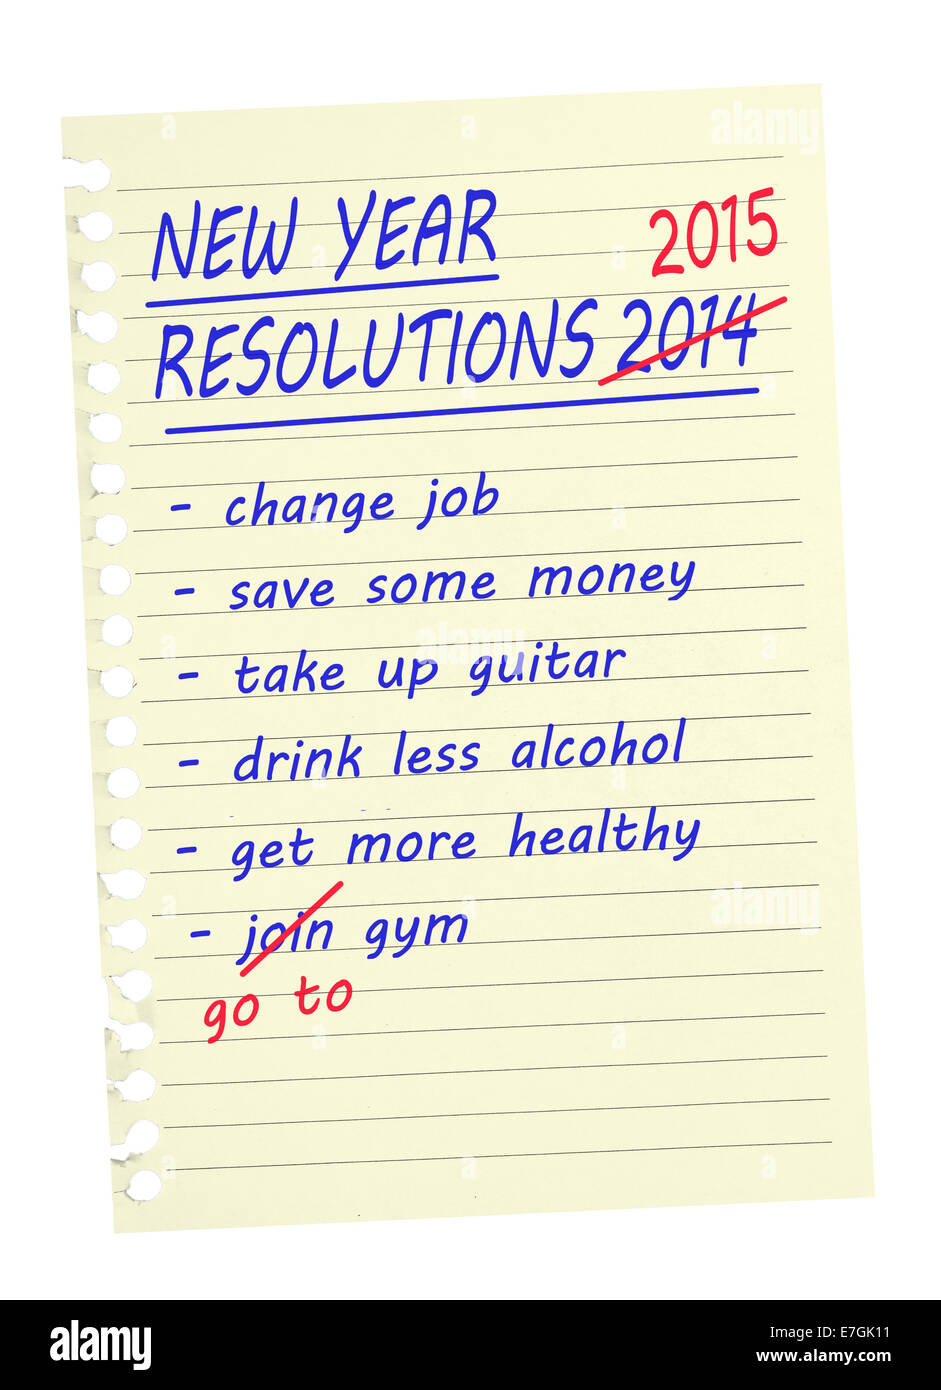 Same again - new year resolutions. White background. Stock Photo